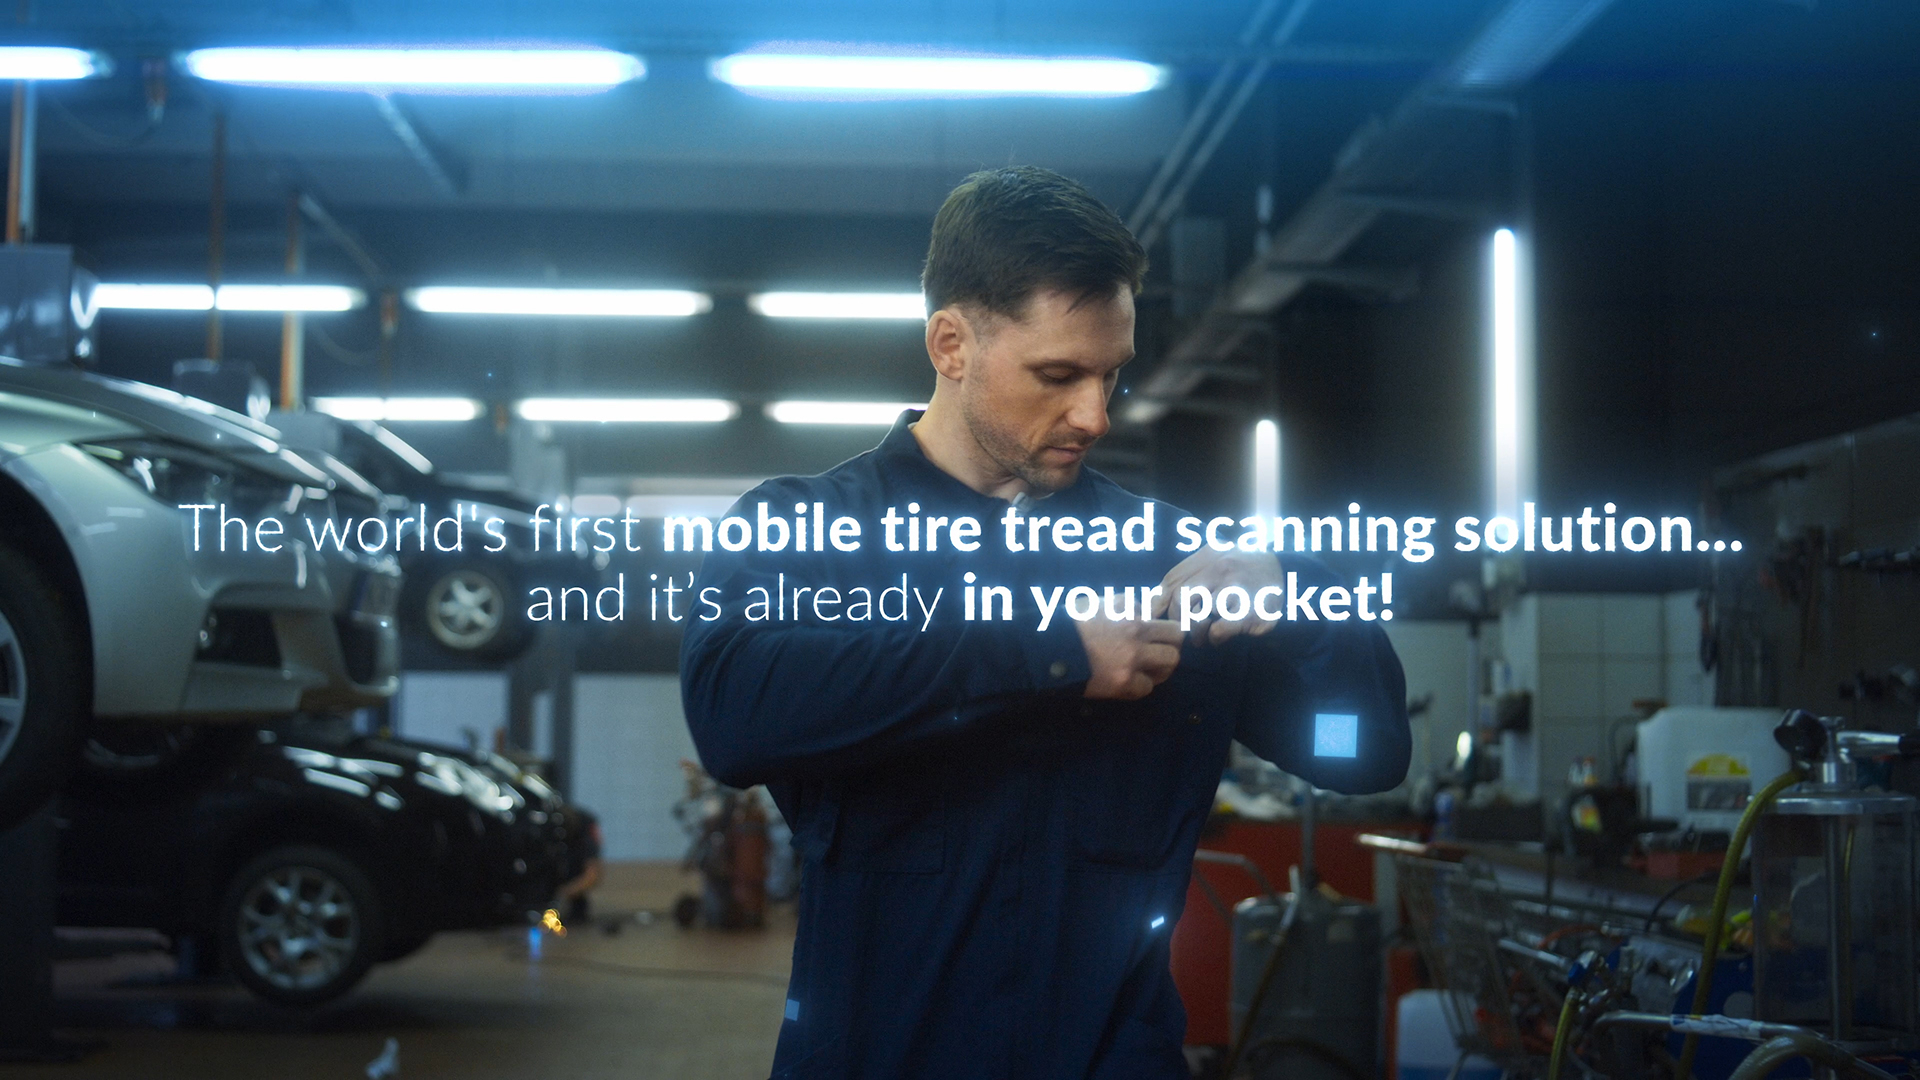 Anyline, a global leader in mobile data capture and artificial intelligence, launched an industry-first Tire Tread Scanner that works on any camera-enabled smartphone or mobile device. The software solution, which accurately and reliably measures tire tread depth, is expected to revolutionize the automotive industry. The product will be unveiled at a press conference held at the SEMA Show 2022 in Las Vegas on Nov. 2